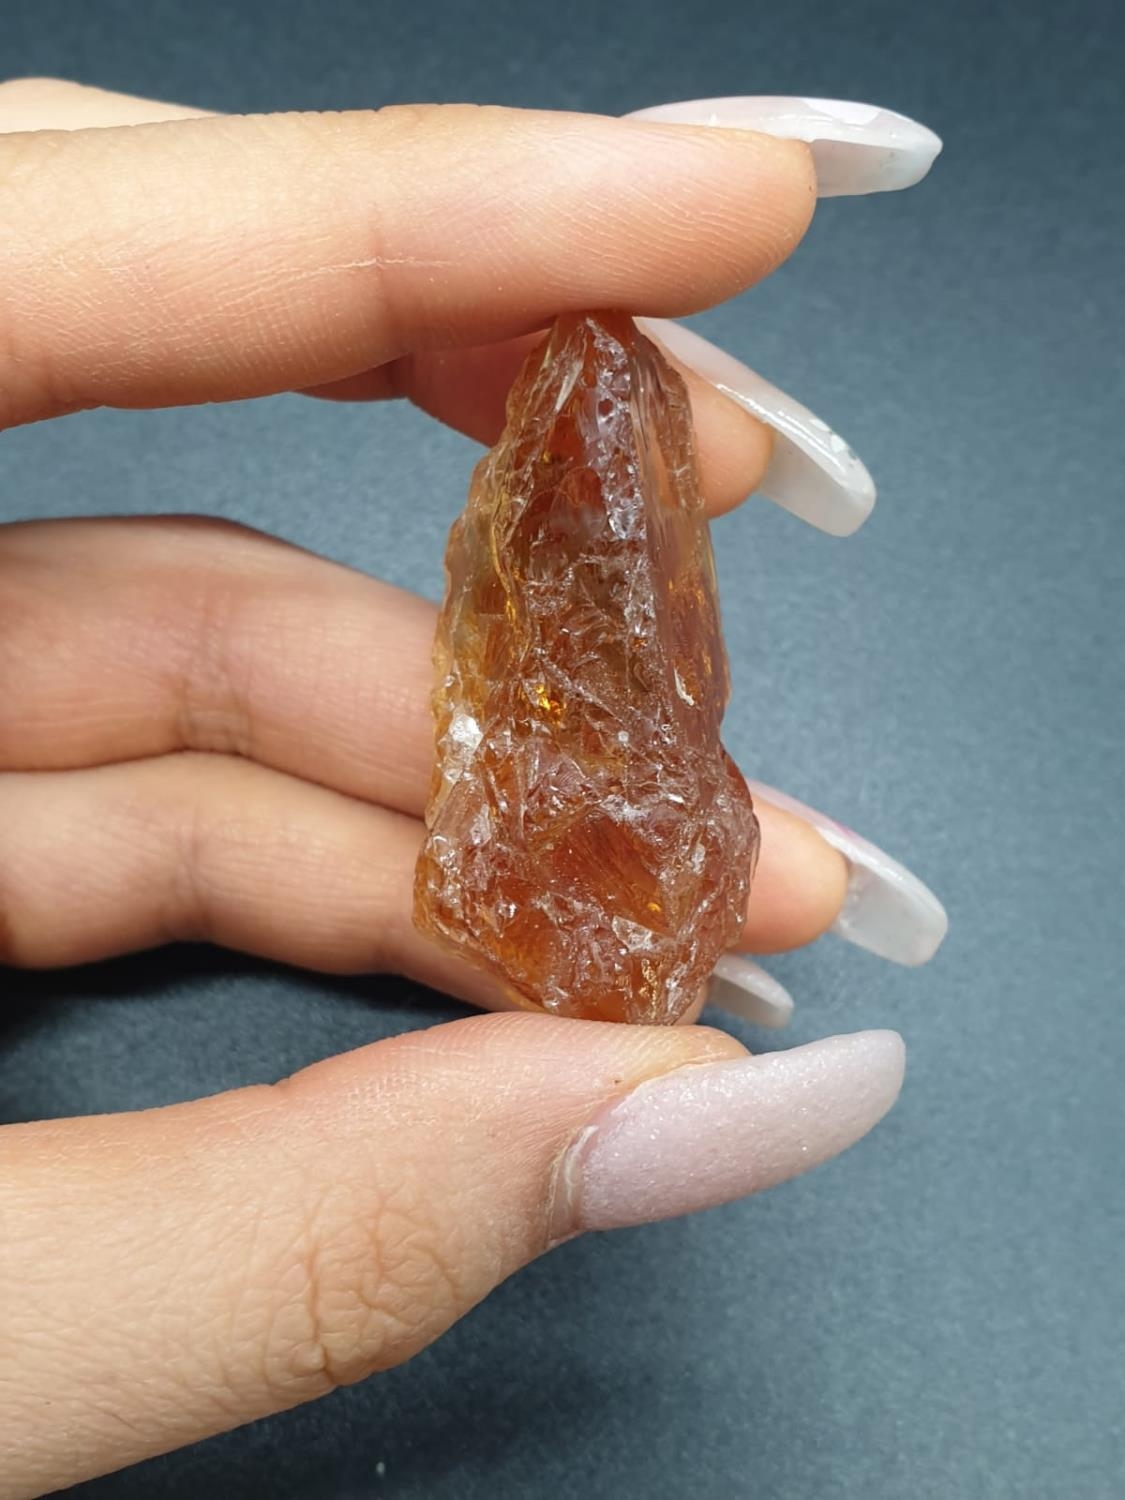 134.60 Ct Natural Citrine. Rough shape. ITLGR certified - Image 4 of 4